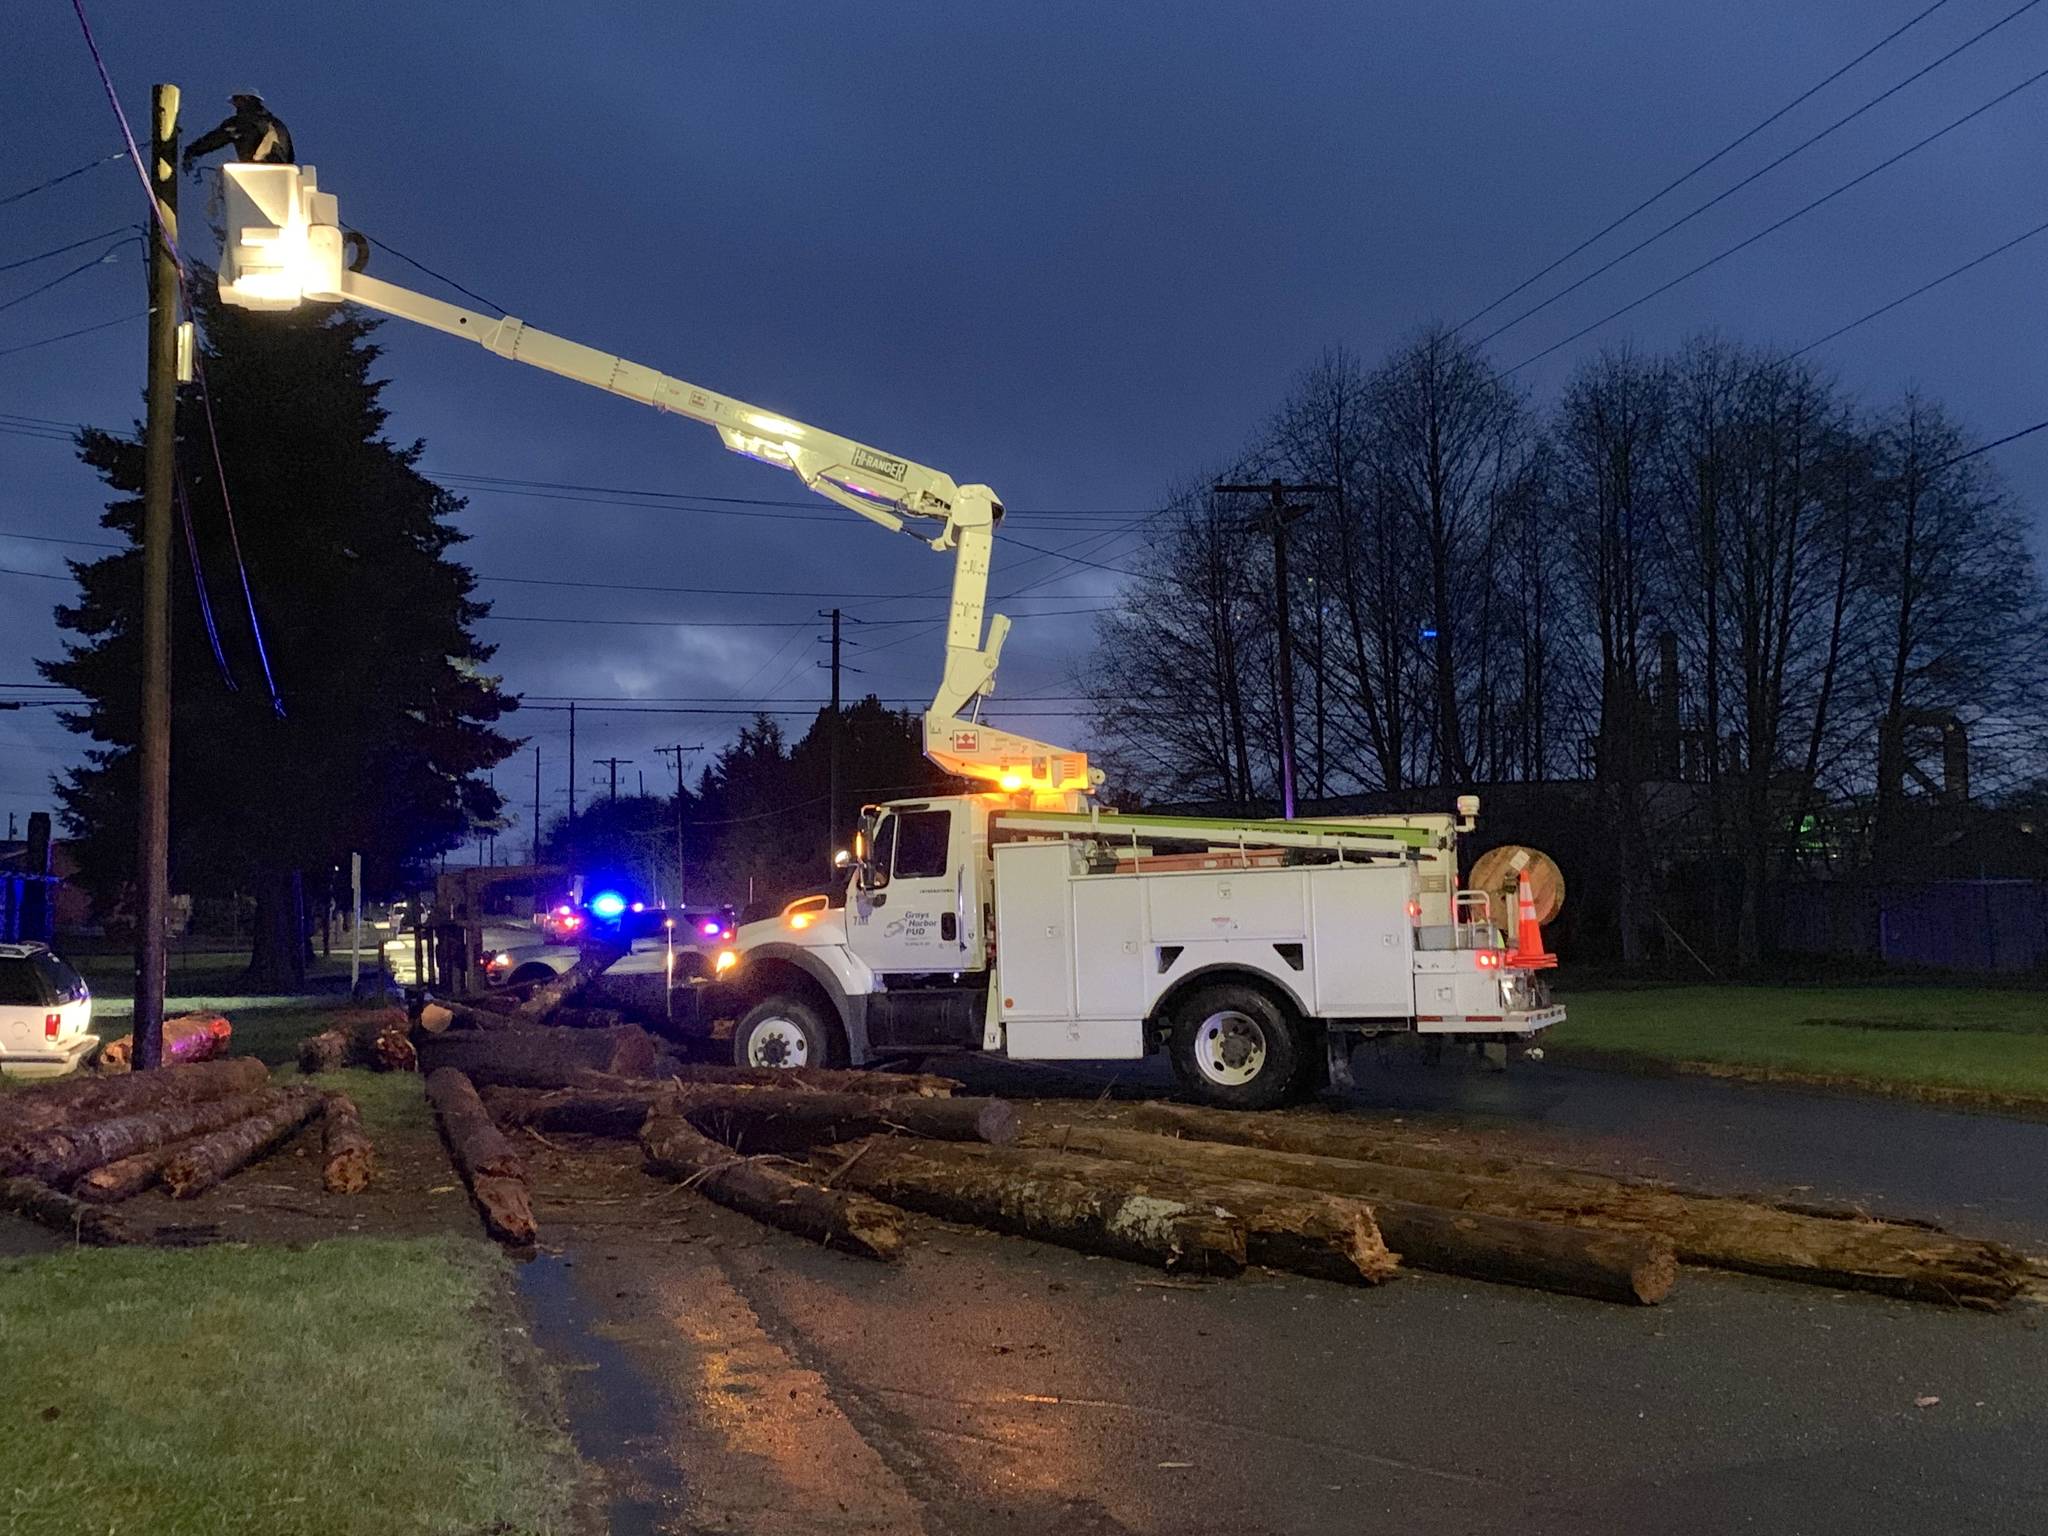 A PUD crew checks a power pole near the Simpson Avenue Bridge in Hoquiam Friday evening. A log truck lost its load going around a corner at 22nd Street and some of the logs rolled into the pole.